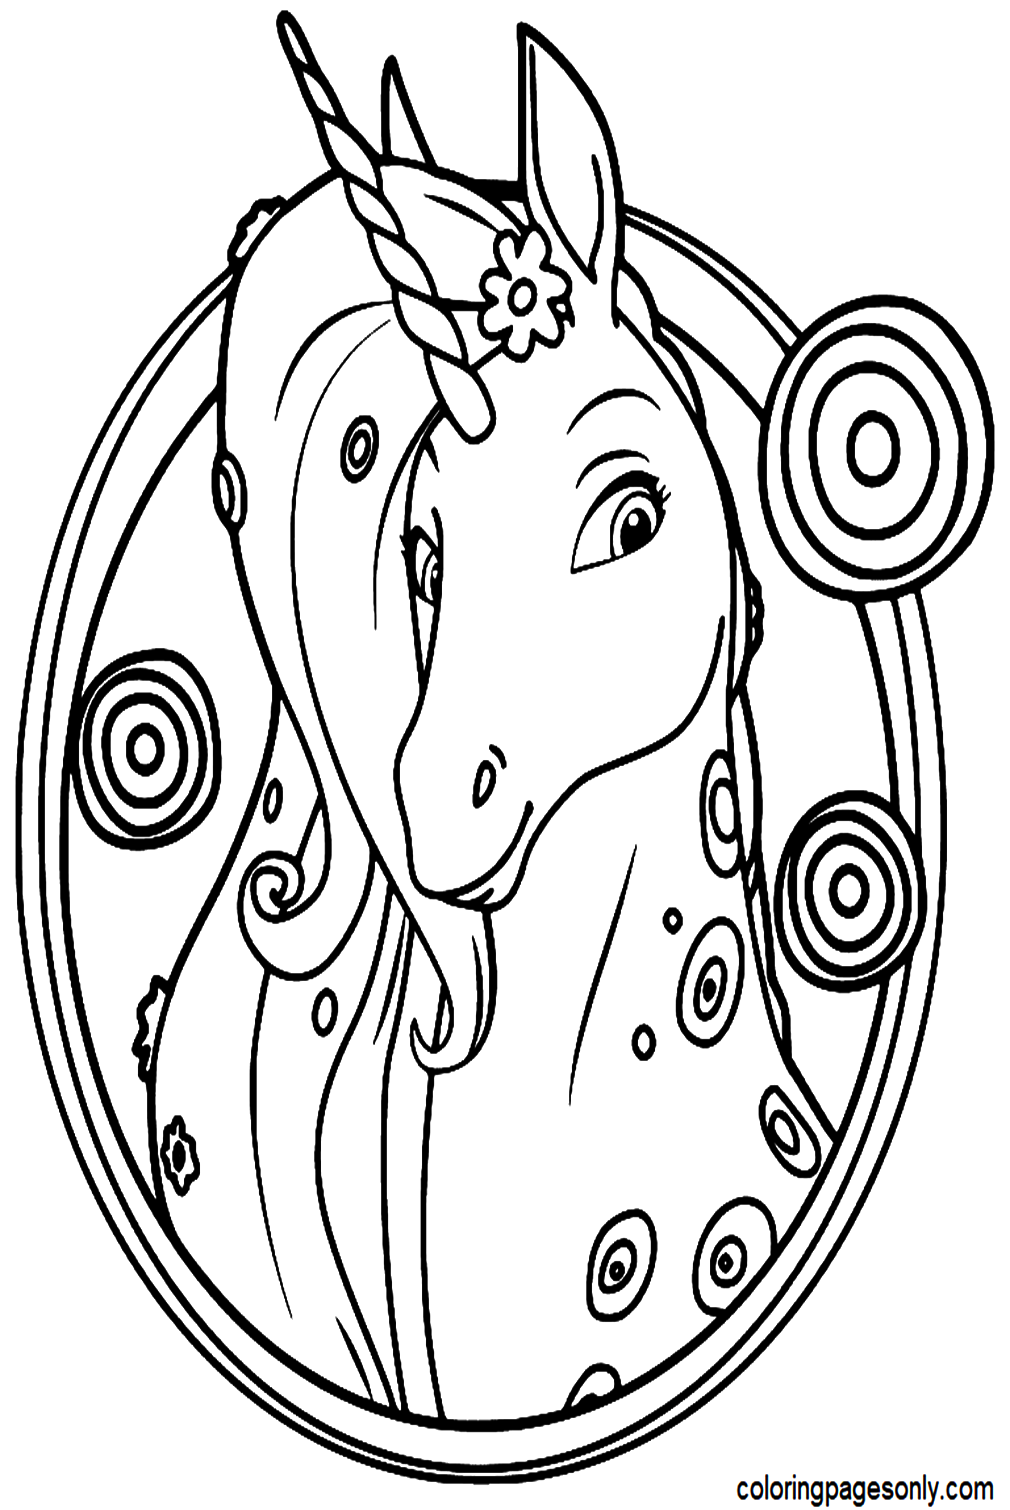 Unicorn Coloring Sheet Coloring Page